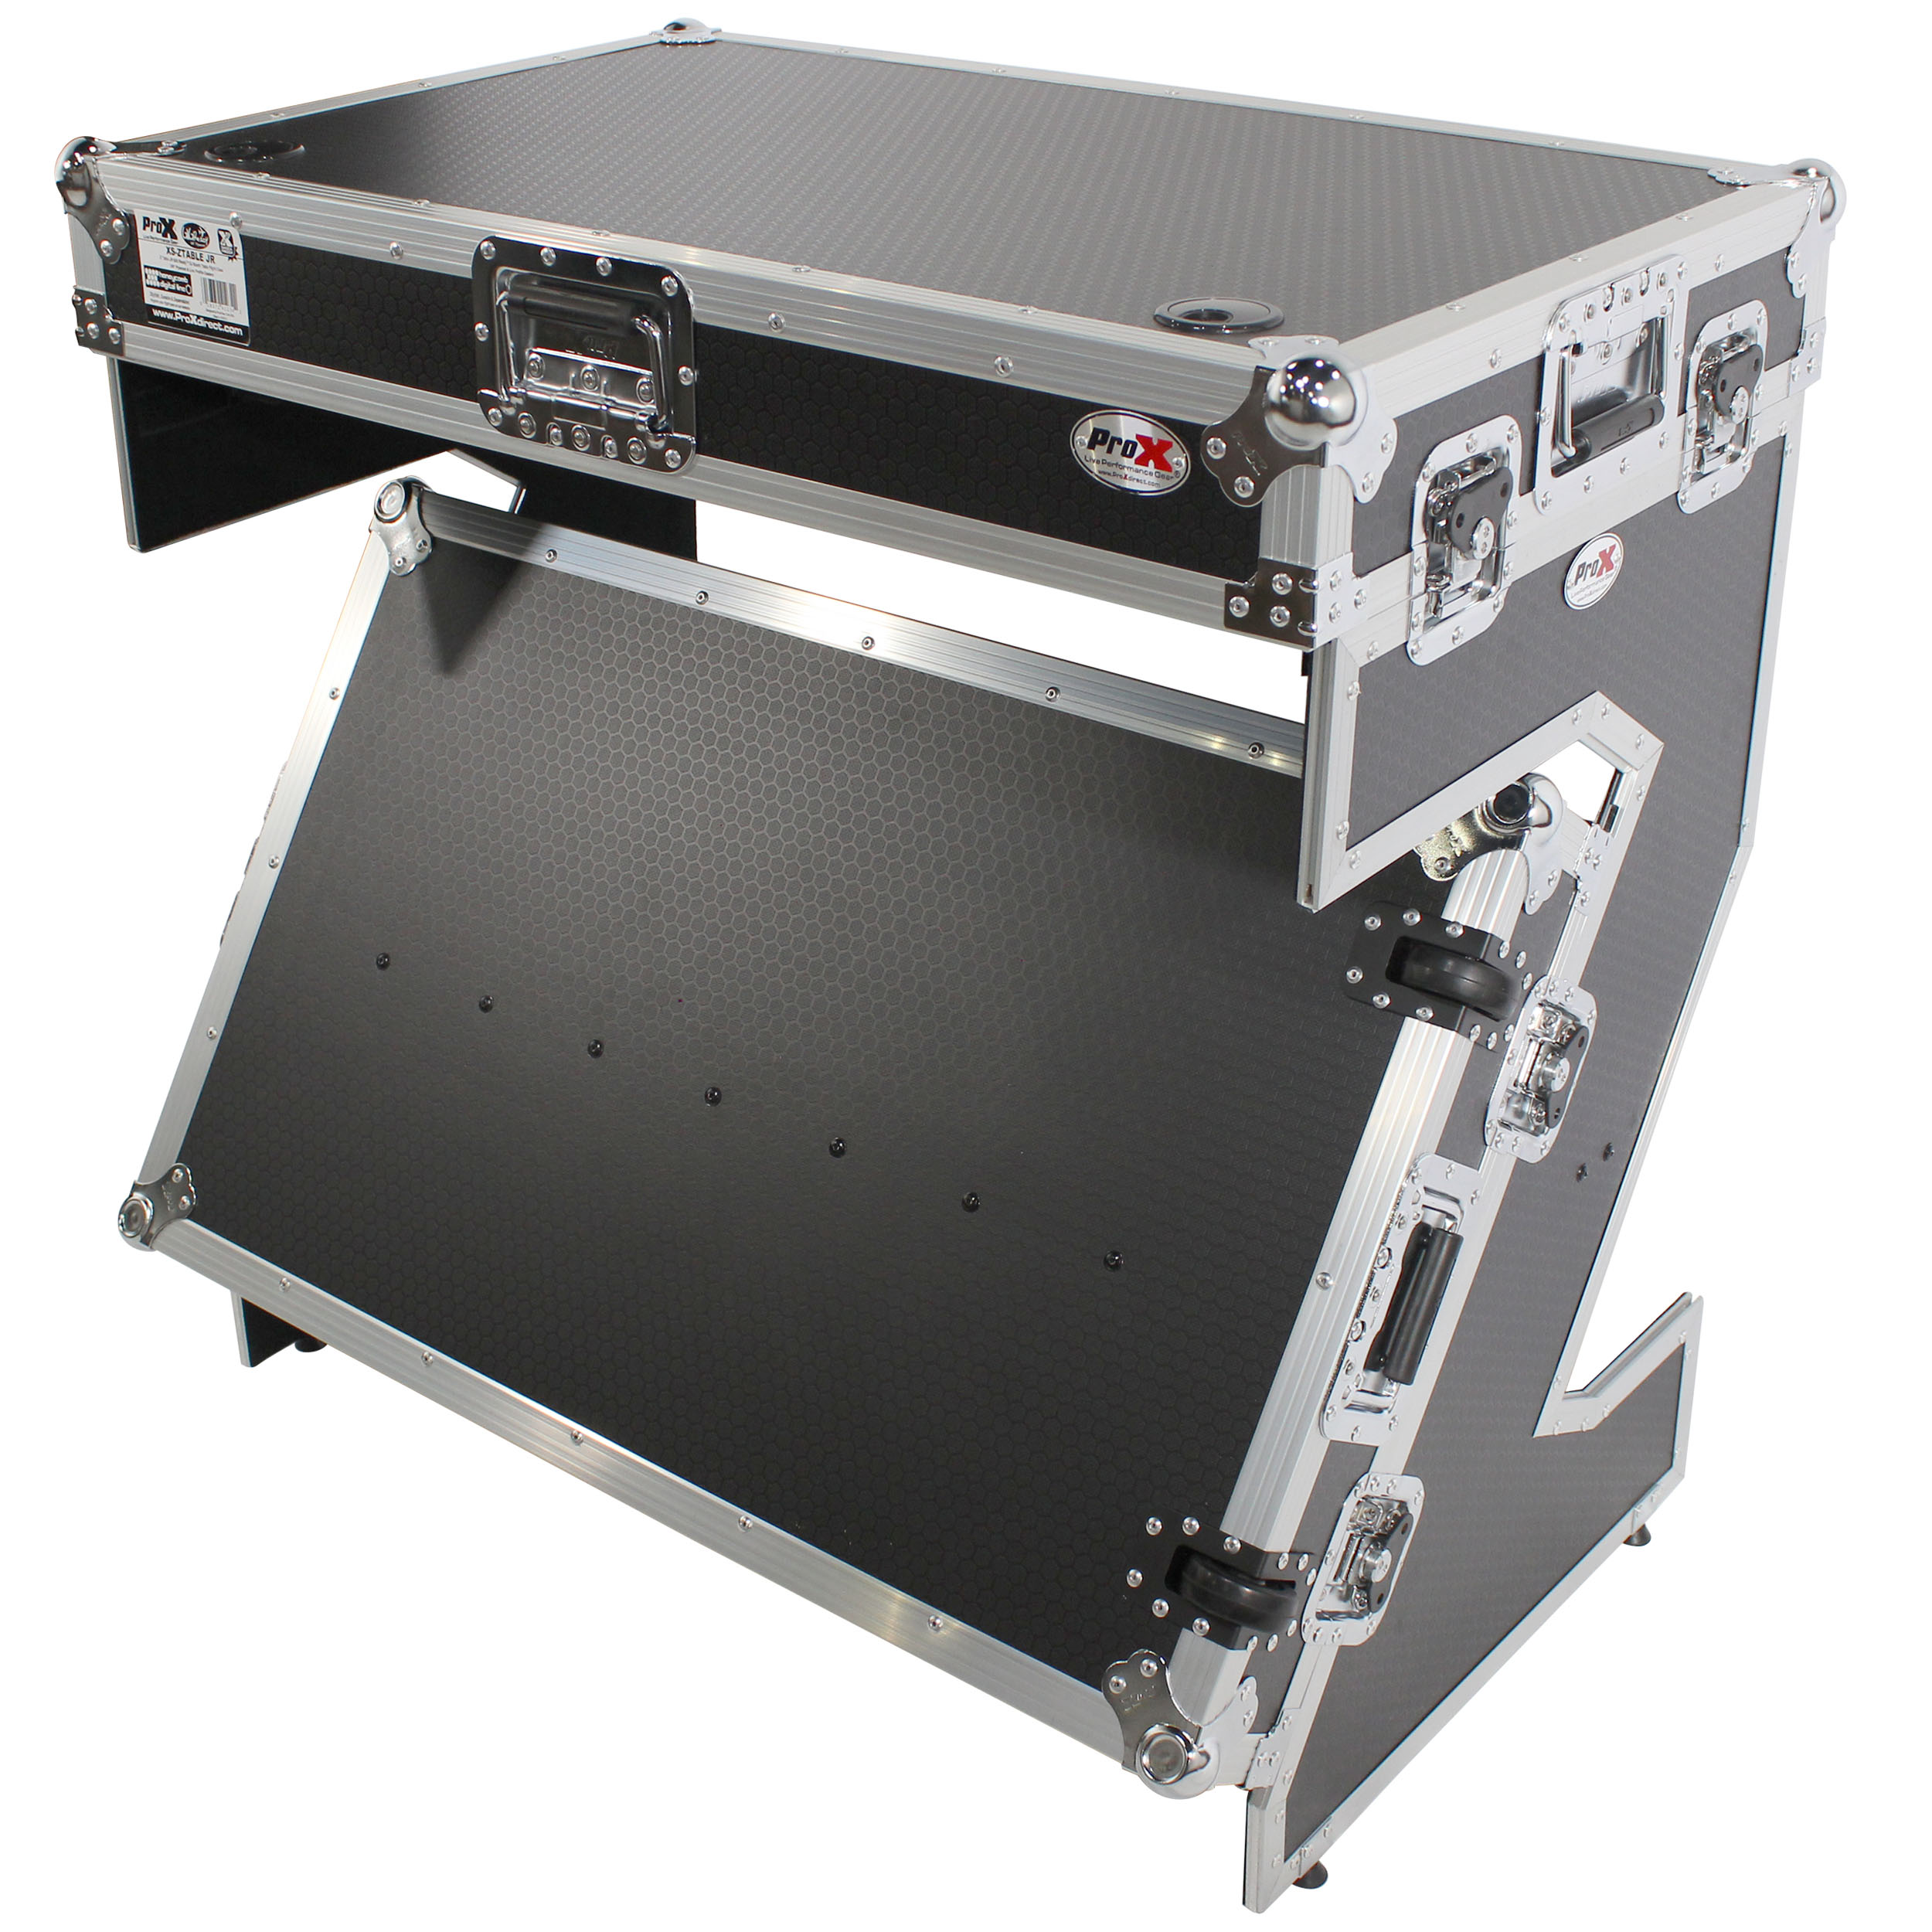 To interact simultaneous Senator DJ Z-Table® Junior Workstation Portable Compact Booth Flight Case Table W  Handles and Wheels | ProX Live Performance Gear